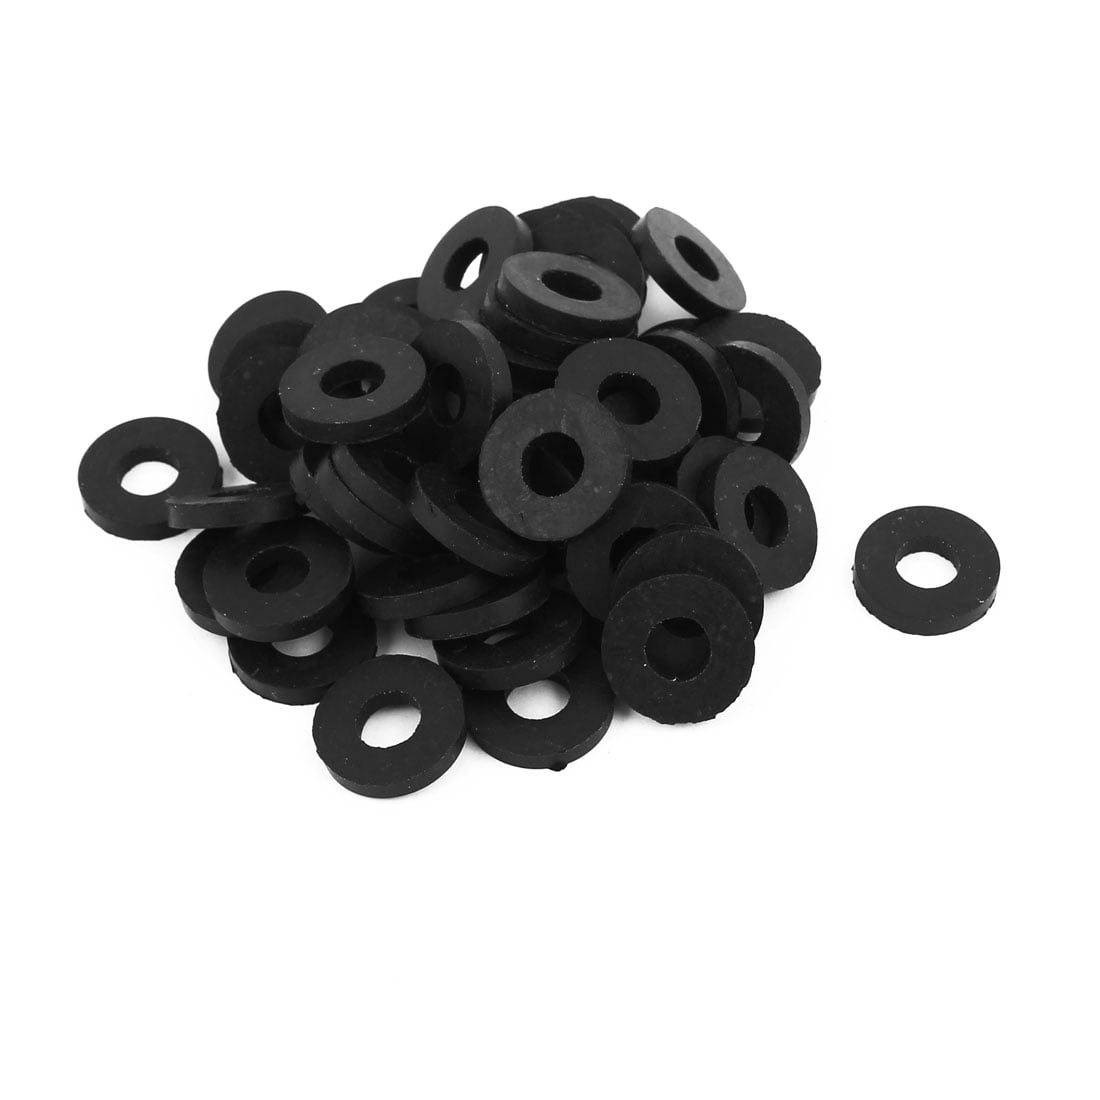 Grommet Gasket Flat Ring Faucet Pressure Washer Set Replacement Attachment Black 